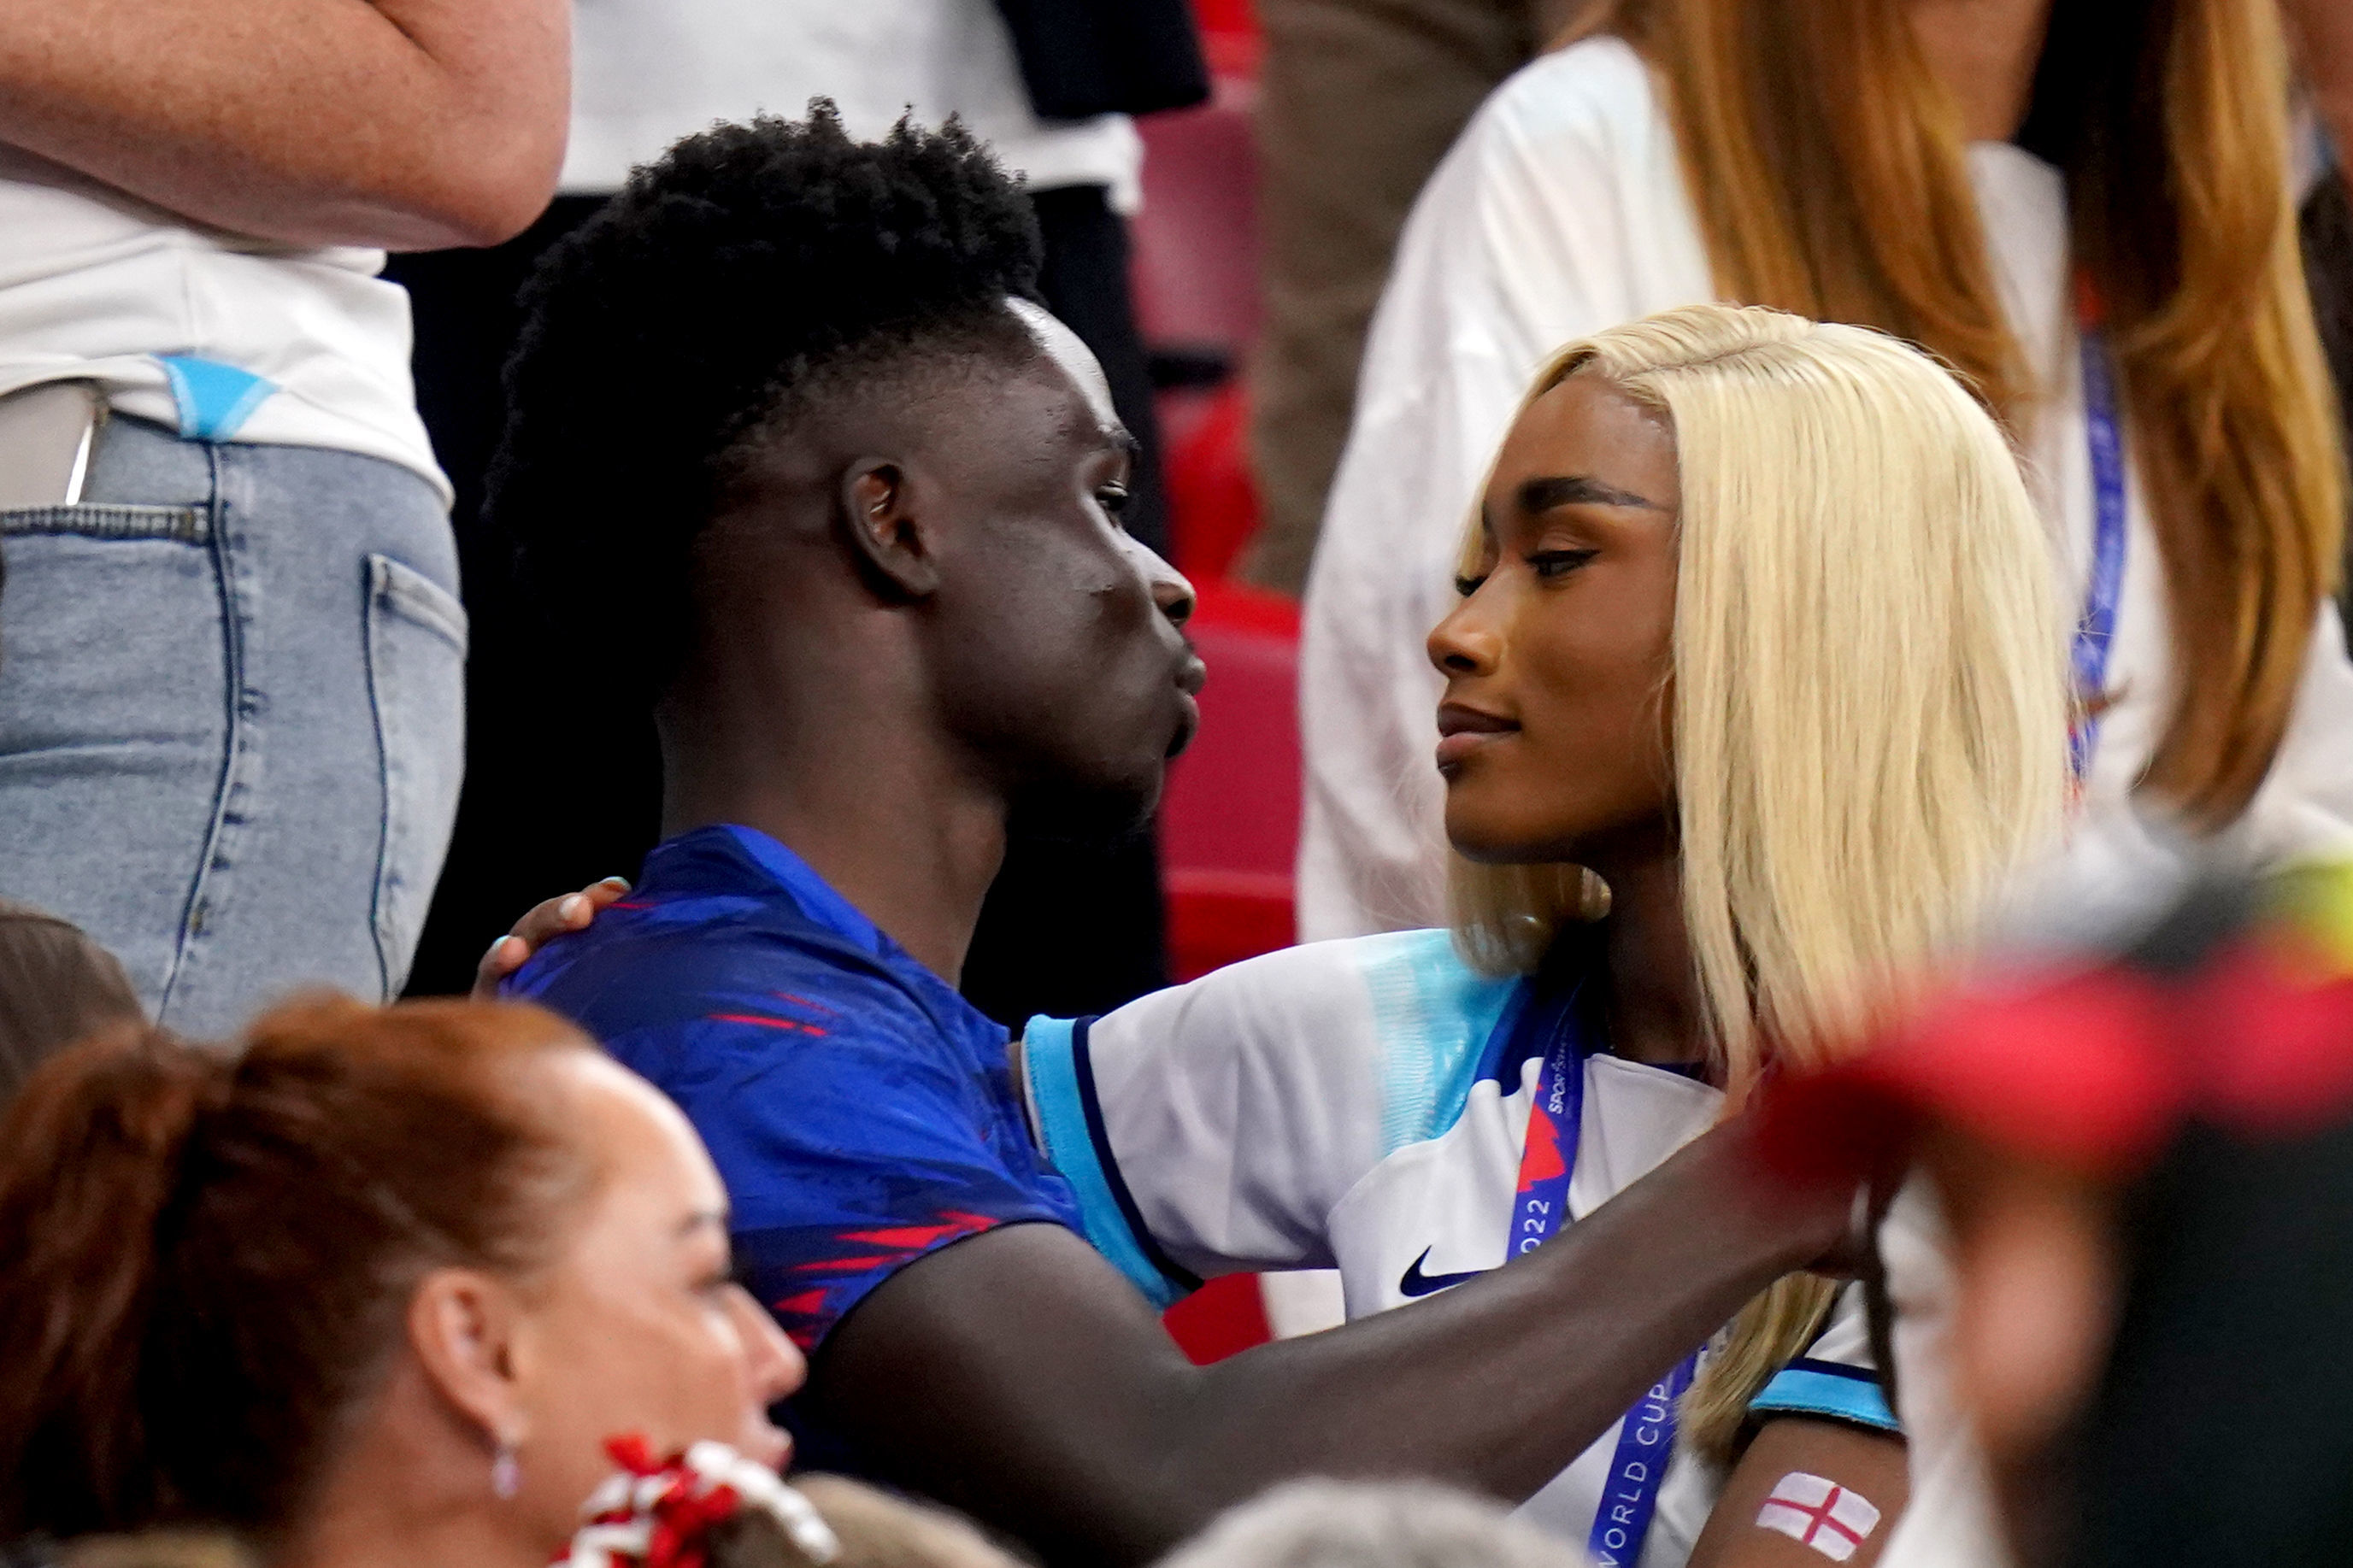 England's Bukayo Saka with his partner Tolami Benson after the match during the FIFA World Cup Group B match at the Ahmad Bin Ali Stadium, Al Rayyan, Qatar. Picture date: Tuesday November 29, 2022. PA Photo. See PA story WORLDCUP Wales. Photo credit should read: Adam Davy/PA Wire. RESTRICTIONS: Use subject to restrictions. Editorial use only, no commercial use without prior consent from rights holder.